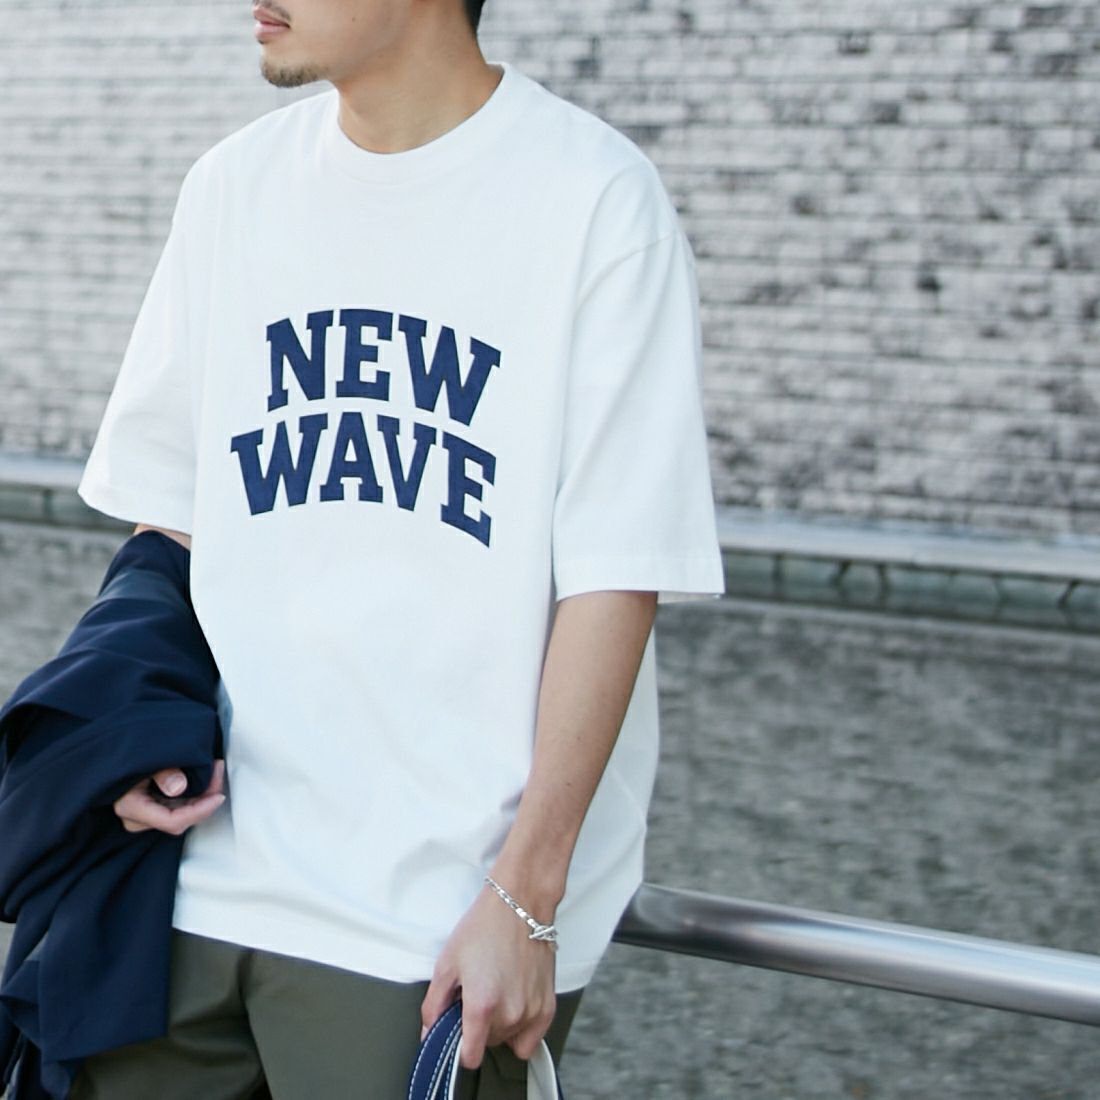 blurhms ROOTSTOCK [ブラームス ルーツストック] 別注 NEW WAVE プリントTシャツ [BROOTS24S34-JF] WHITE &&モデル身長：168cm 着用サイズ：3&&